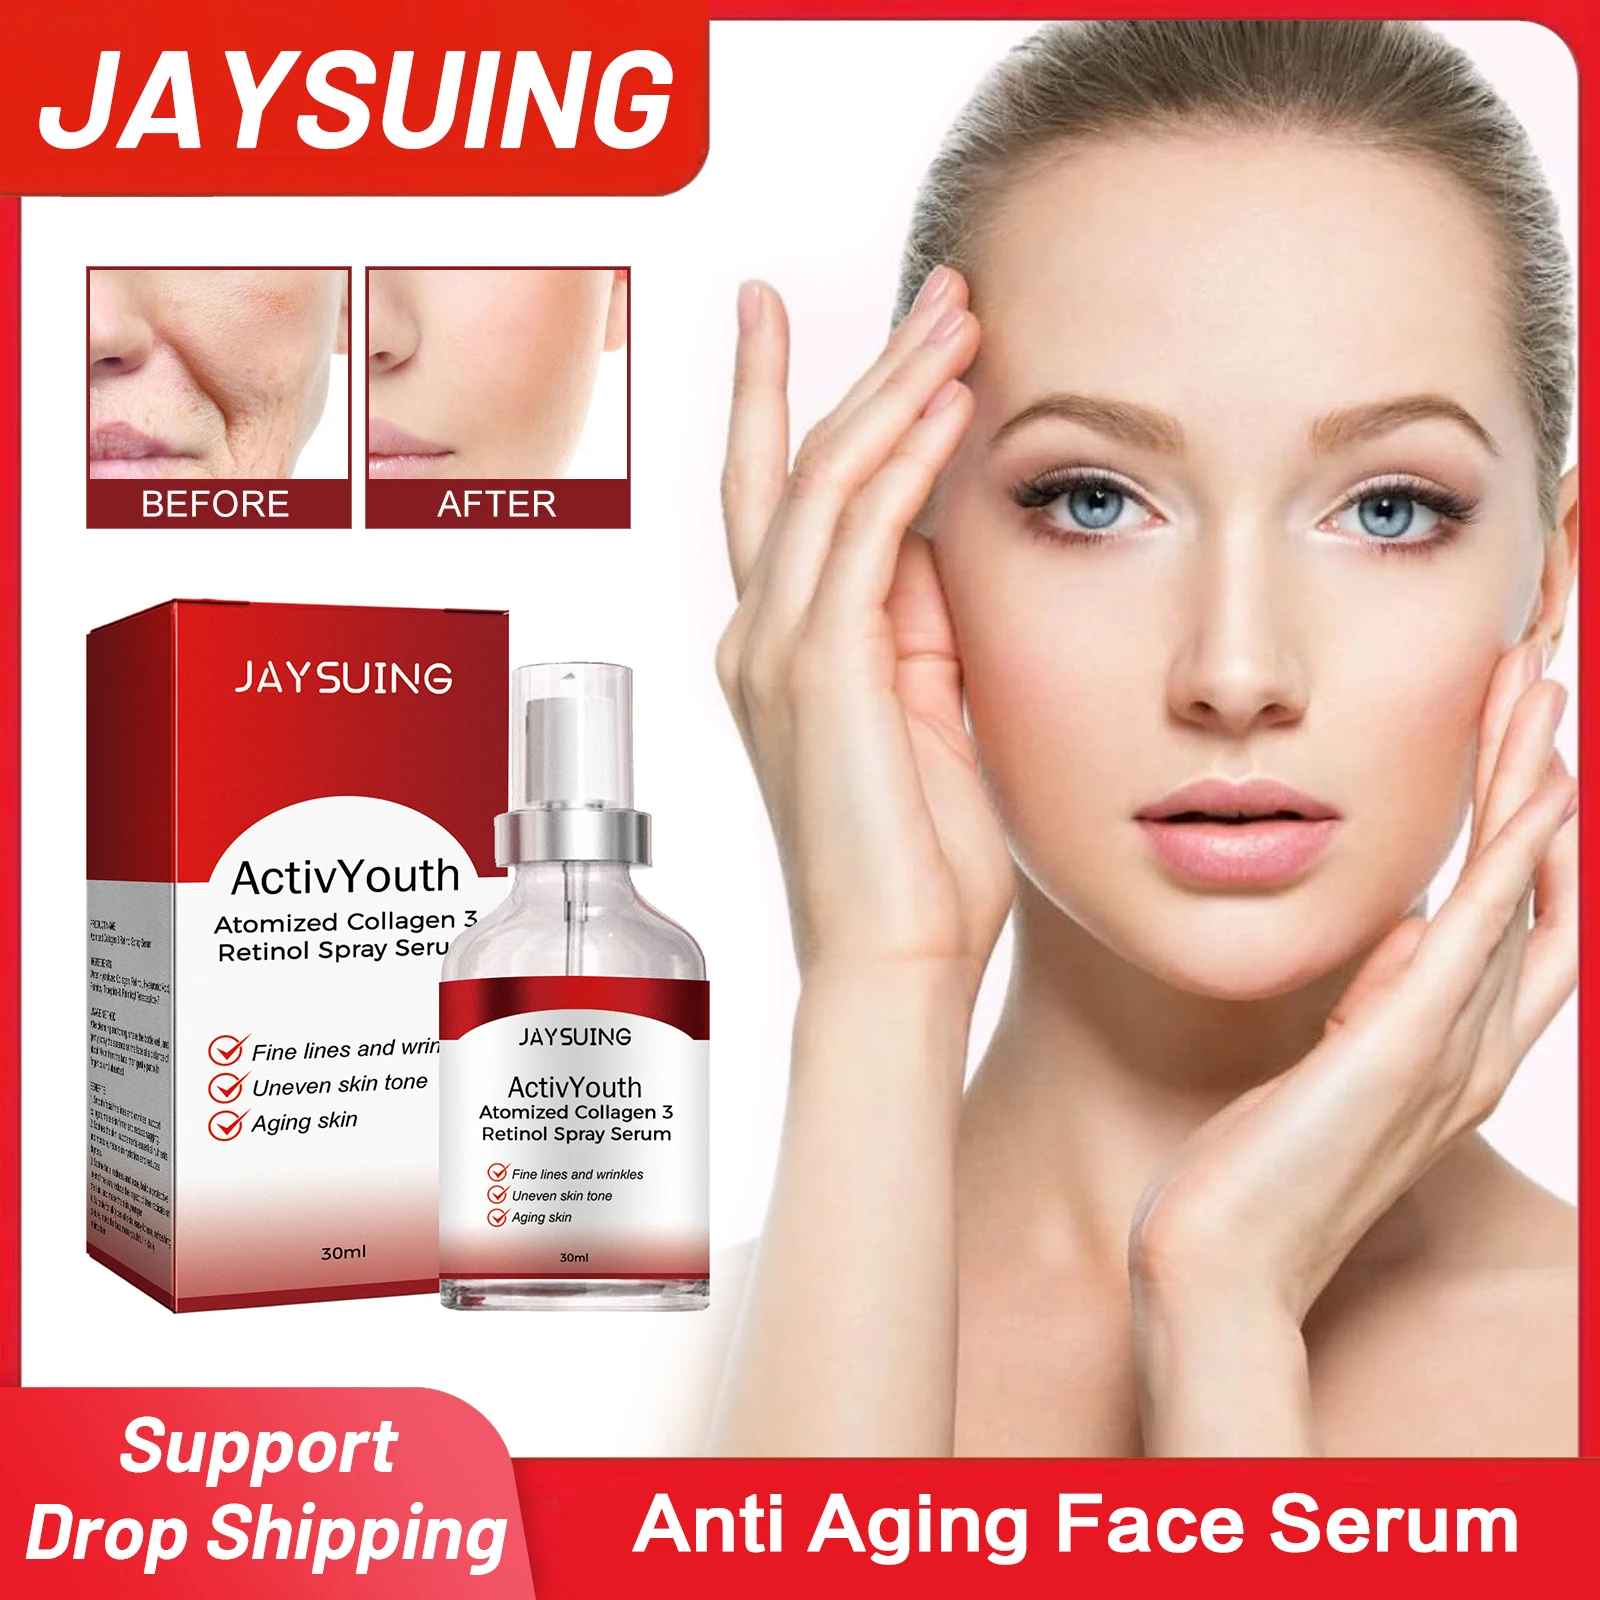 

Anti Aging Face Serum Wrinkle Reduction Remove Fine Lines Dry Lines Increase Skin Elasticity Tightening Firming Skin Care 30ml